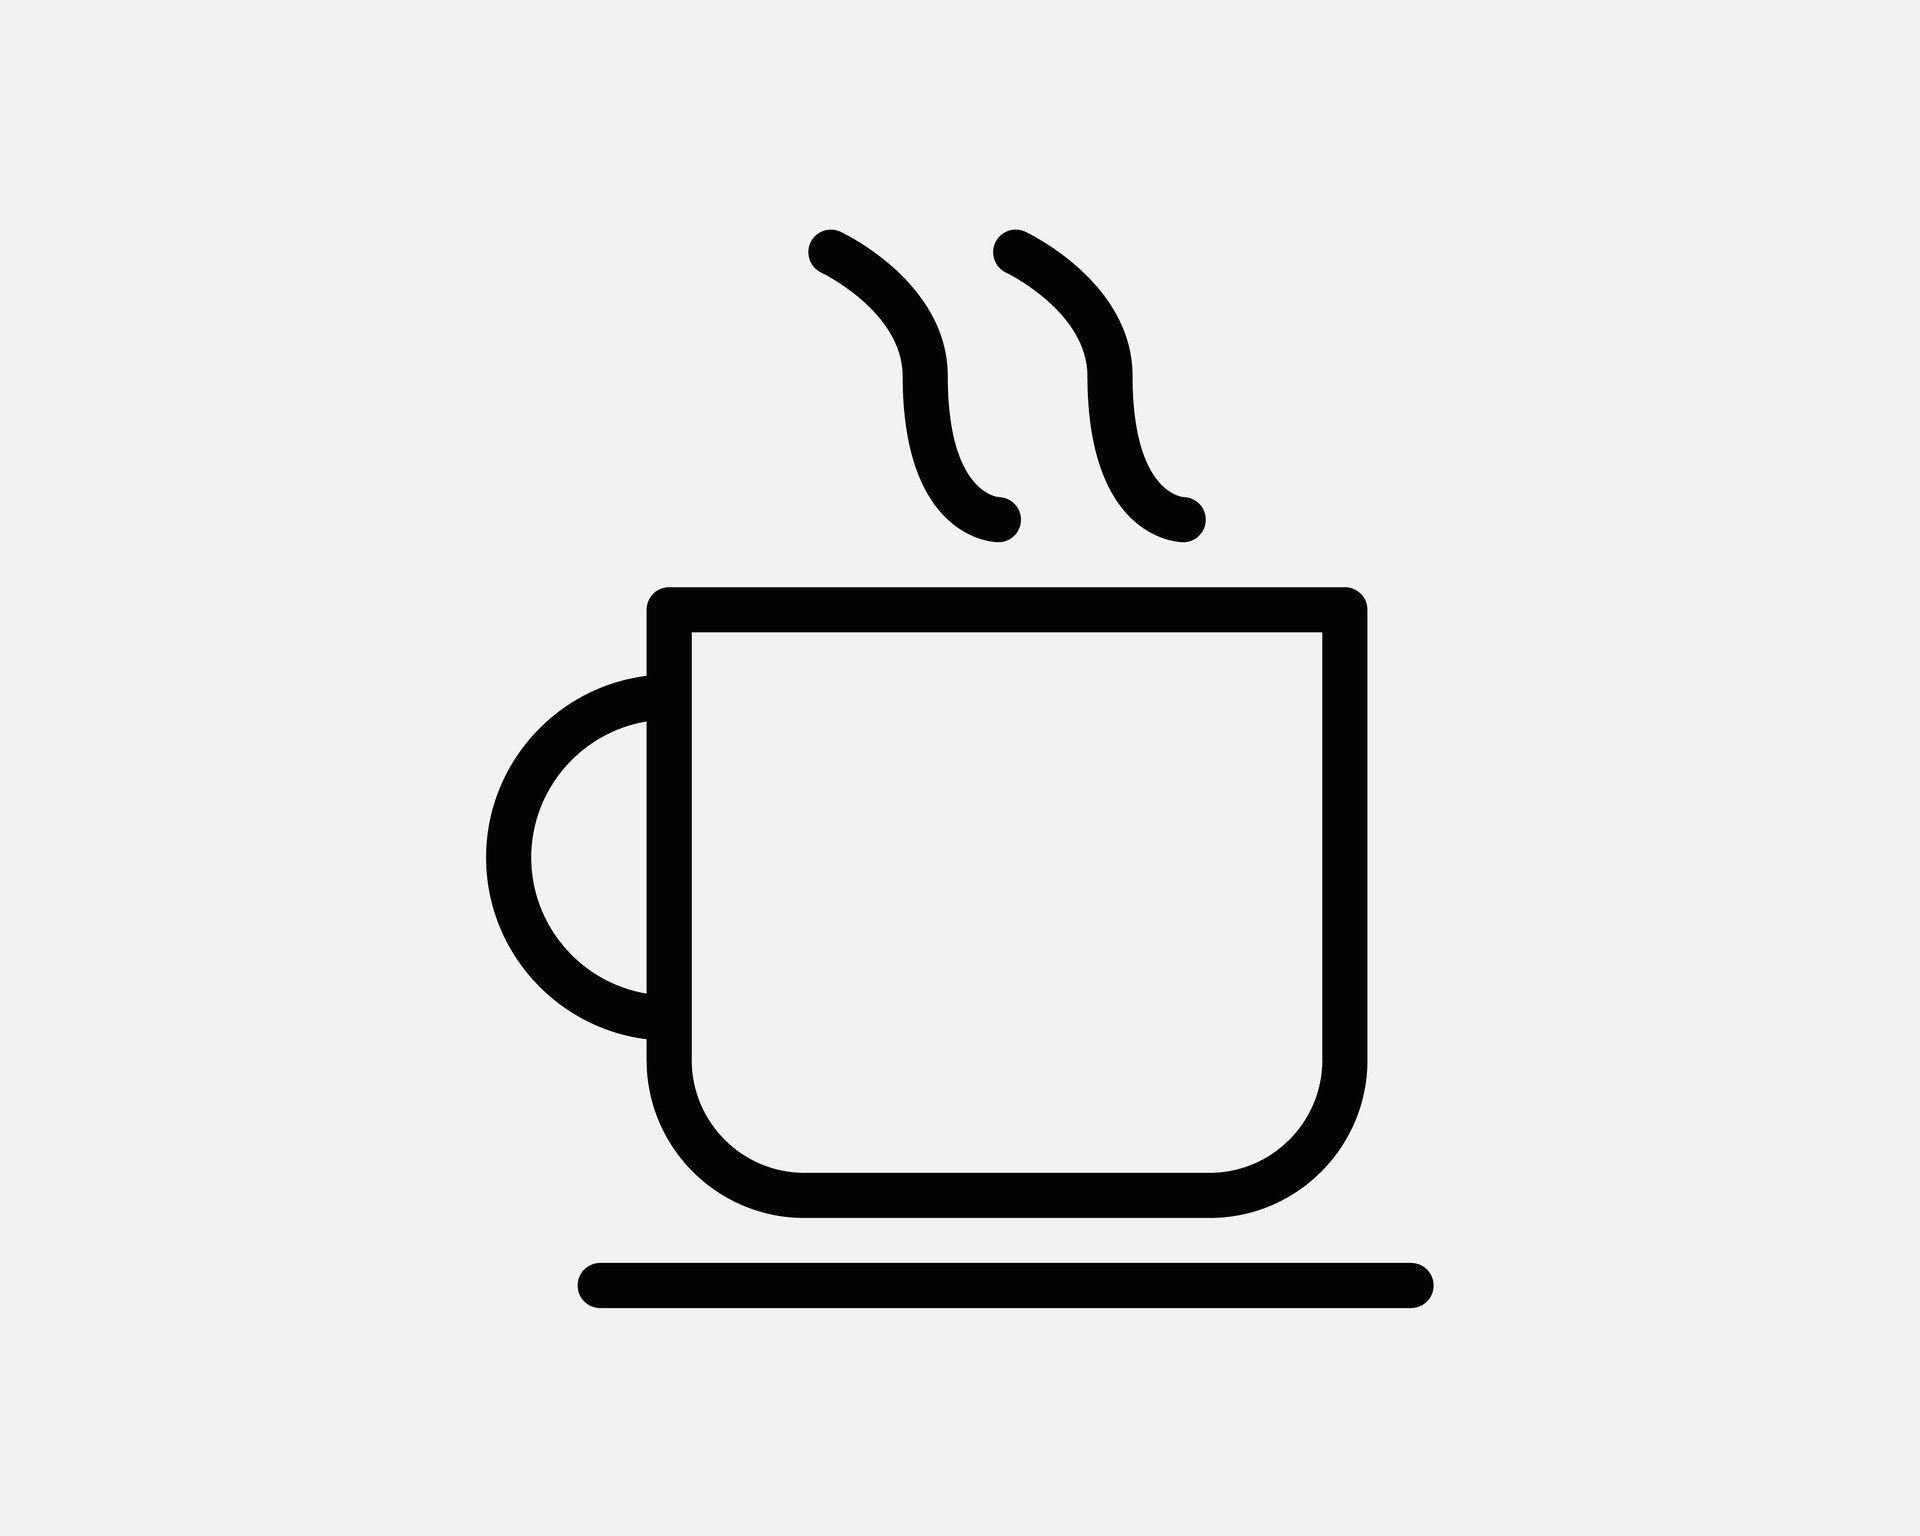 https://static.vecteezy.com/system/resources/previews/026/306/404/original/coffee-cup-icon-hot-beverage-drink-cafe-cafeteria-tea-latte-steam-black-white-sign-symbol-outline-illustration-artwork-graphic-clipart-eps-vector.jpg